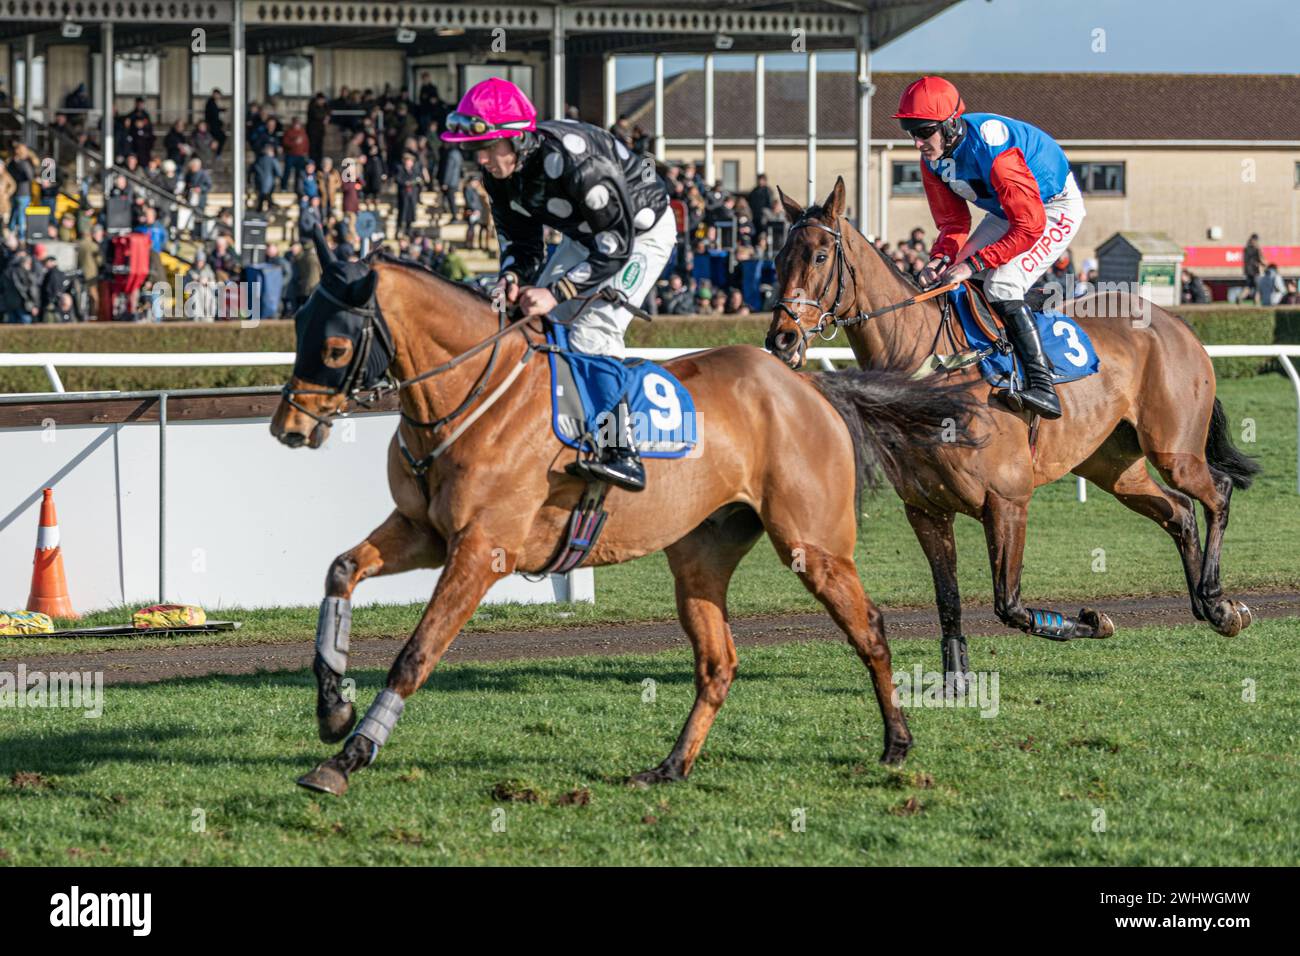 Third race at Wincanton February 19th 2022 - Steeple chase Stock Photo